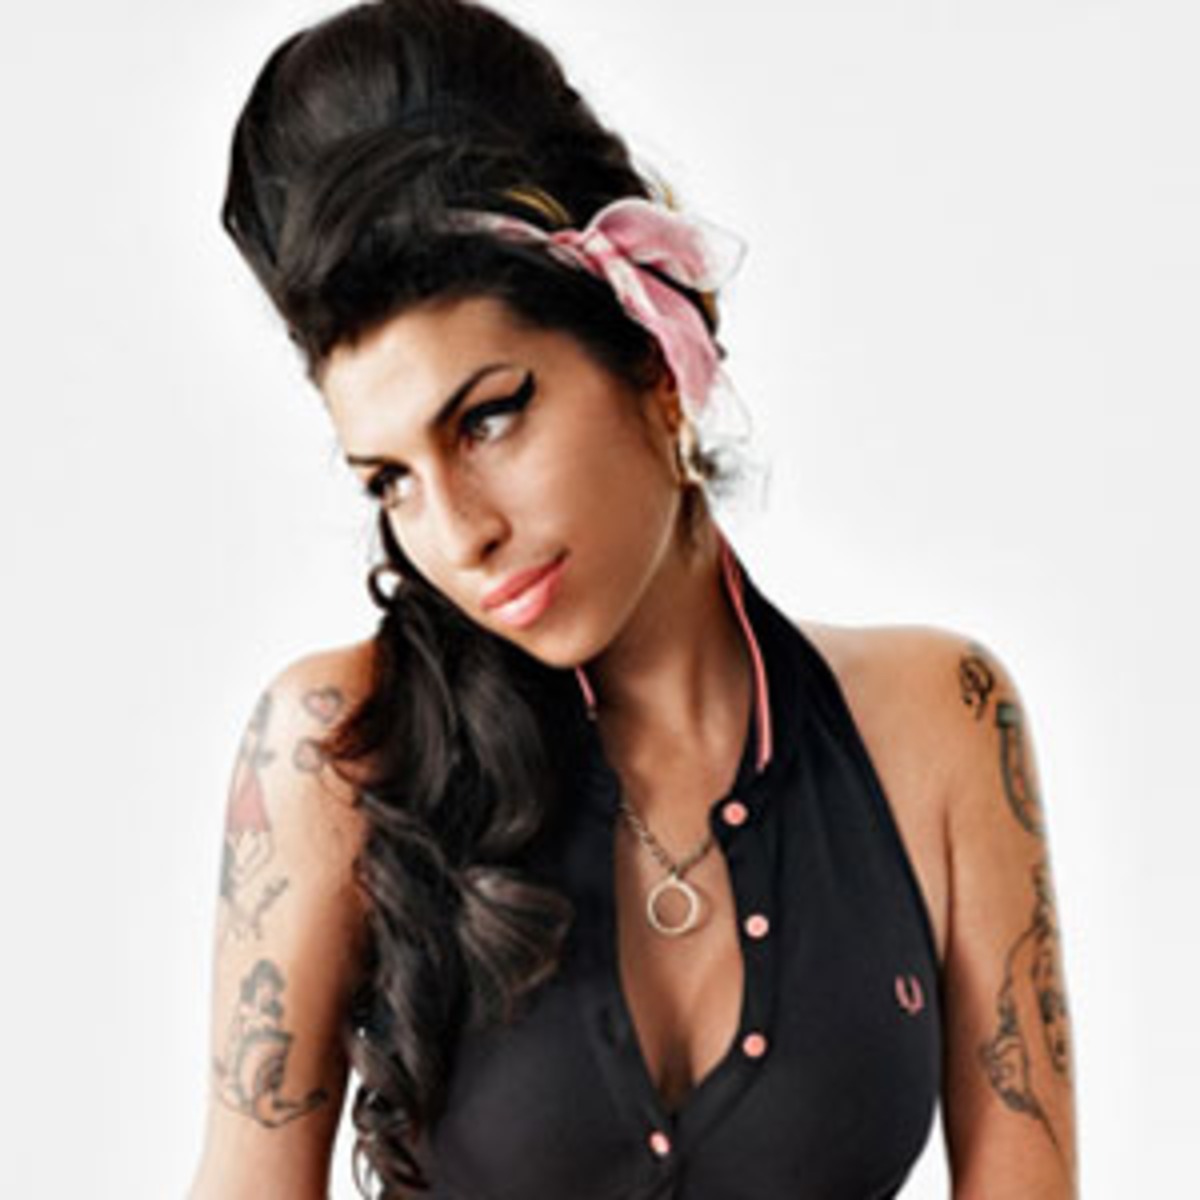 Who gets Amy Winehouse royalties?